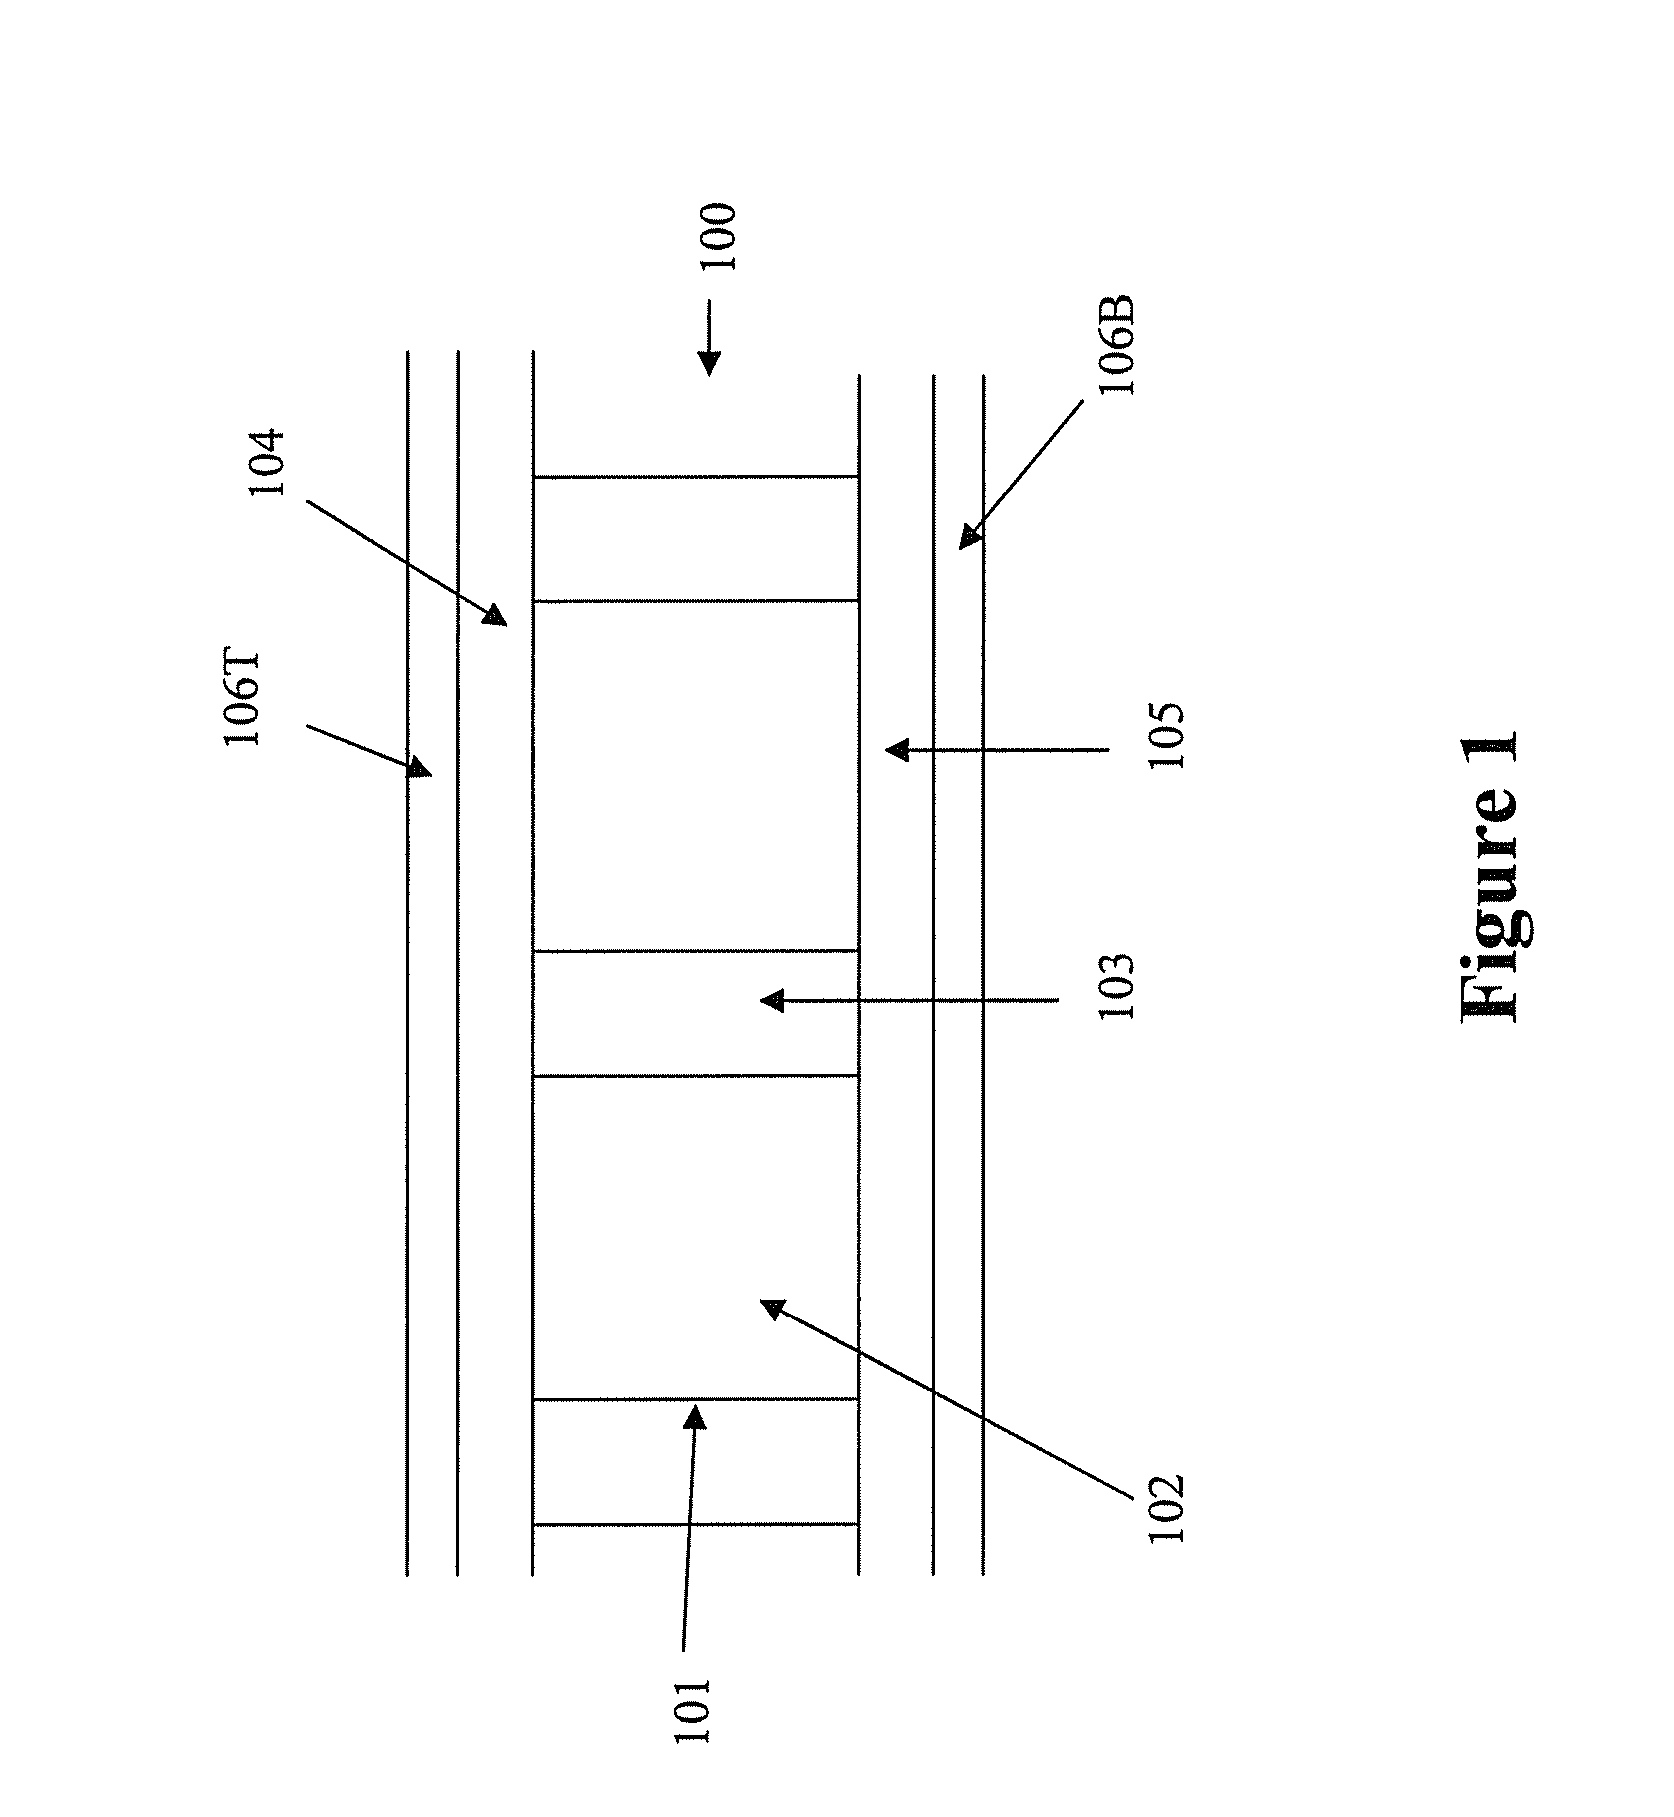 Display device assembly